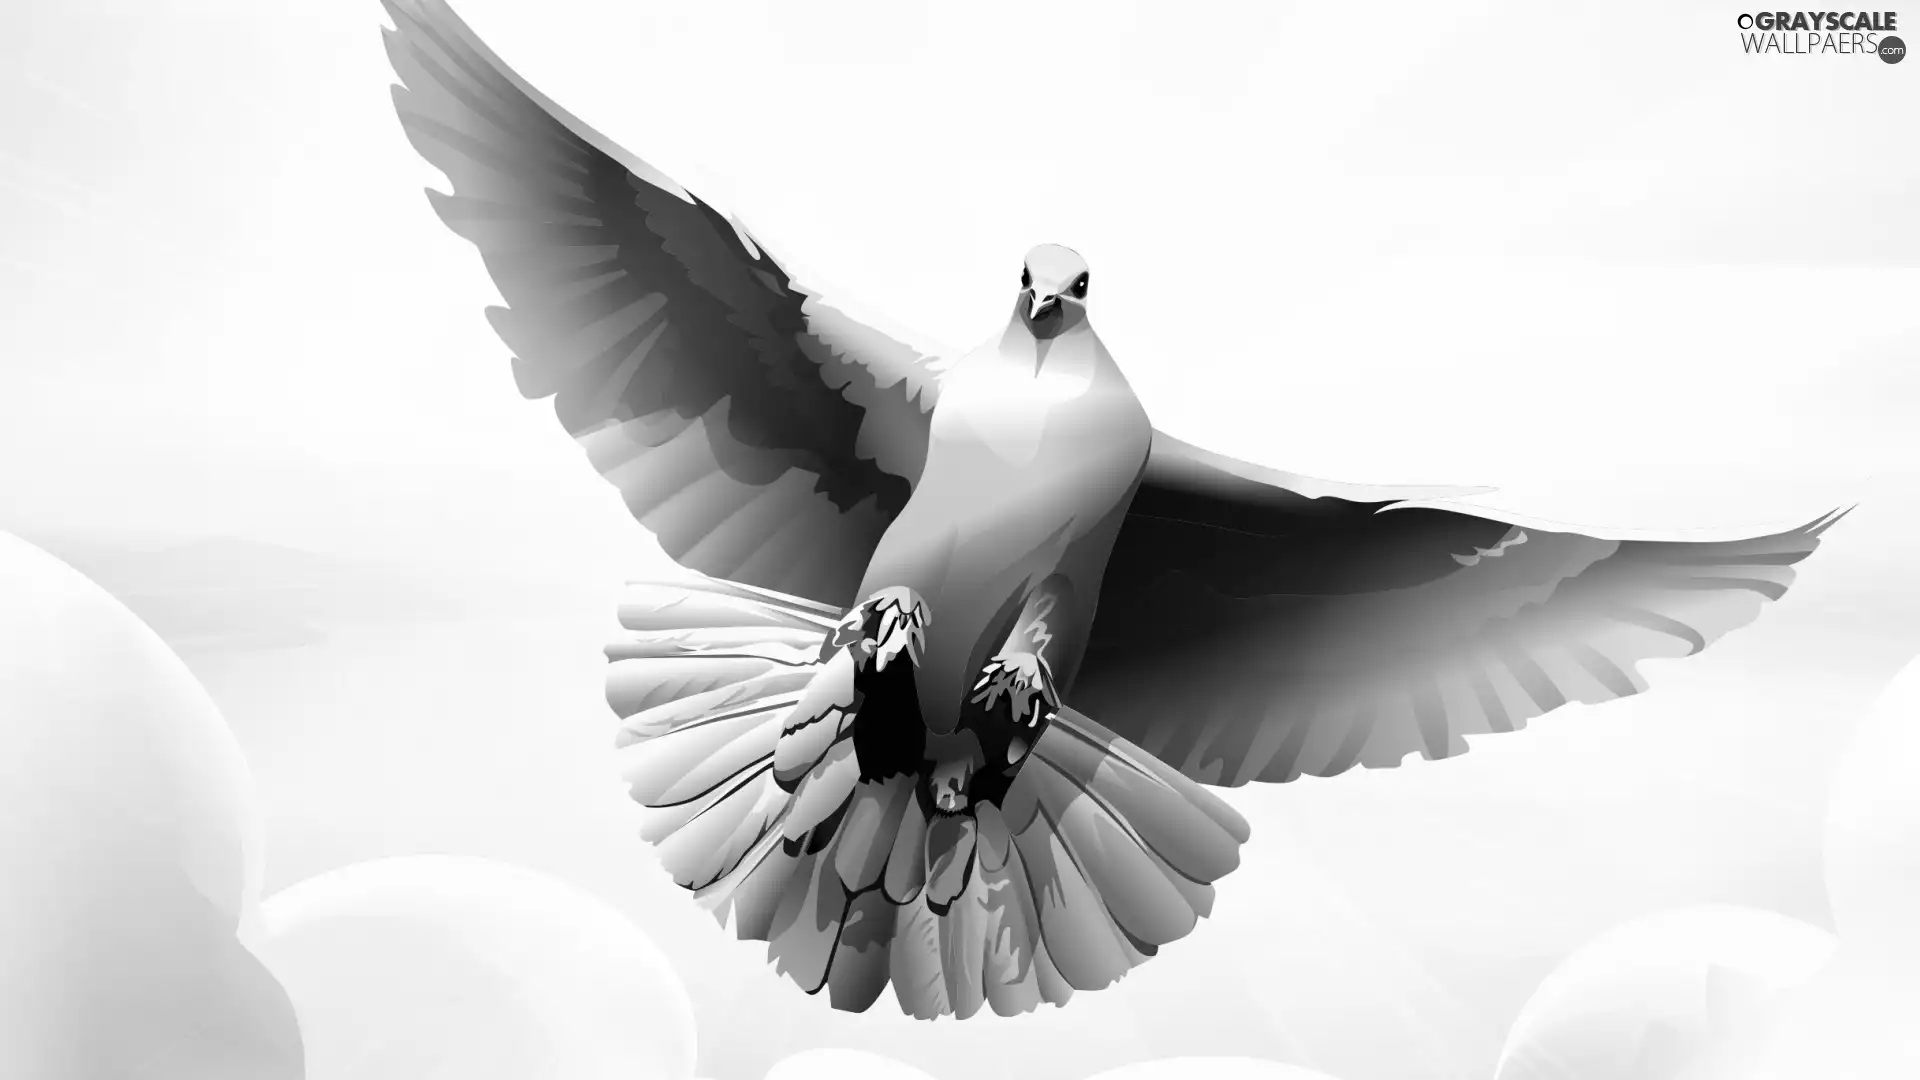 White, spreading, wings, pigeon